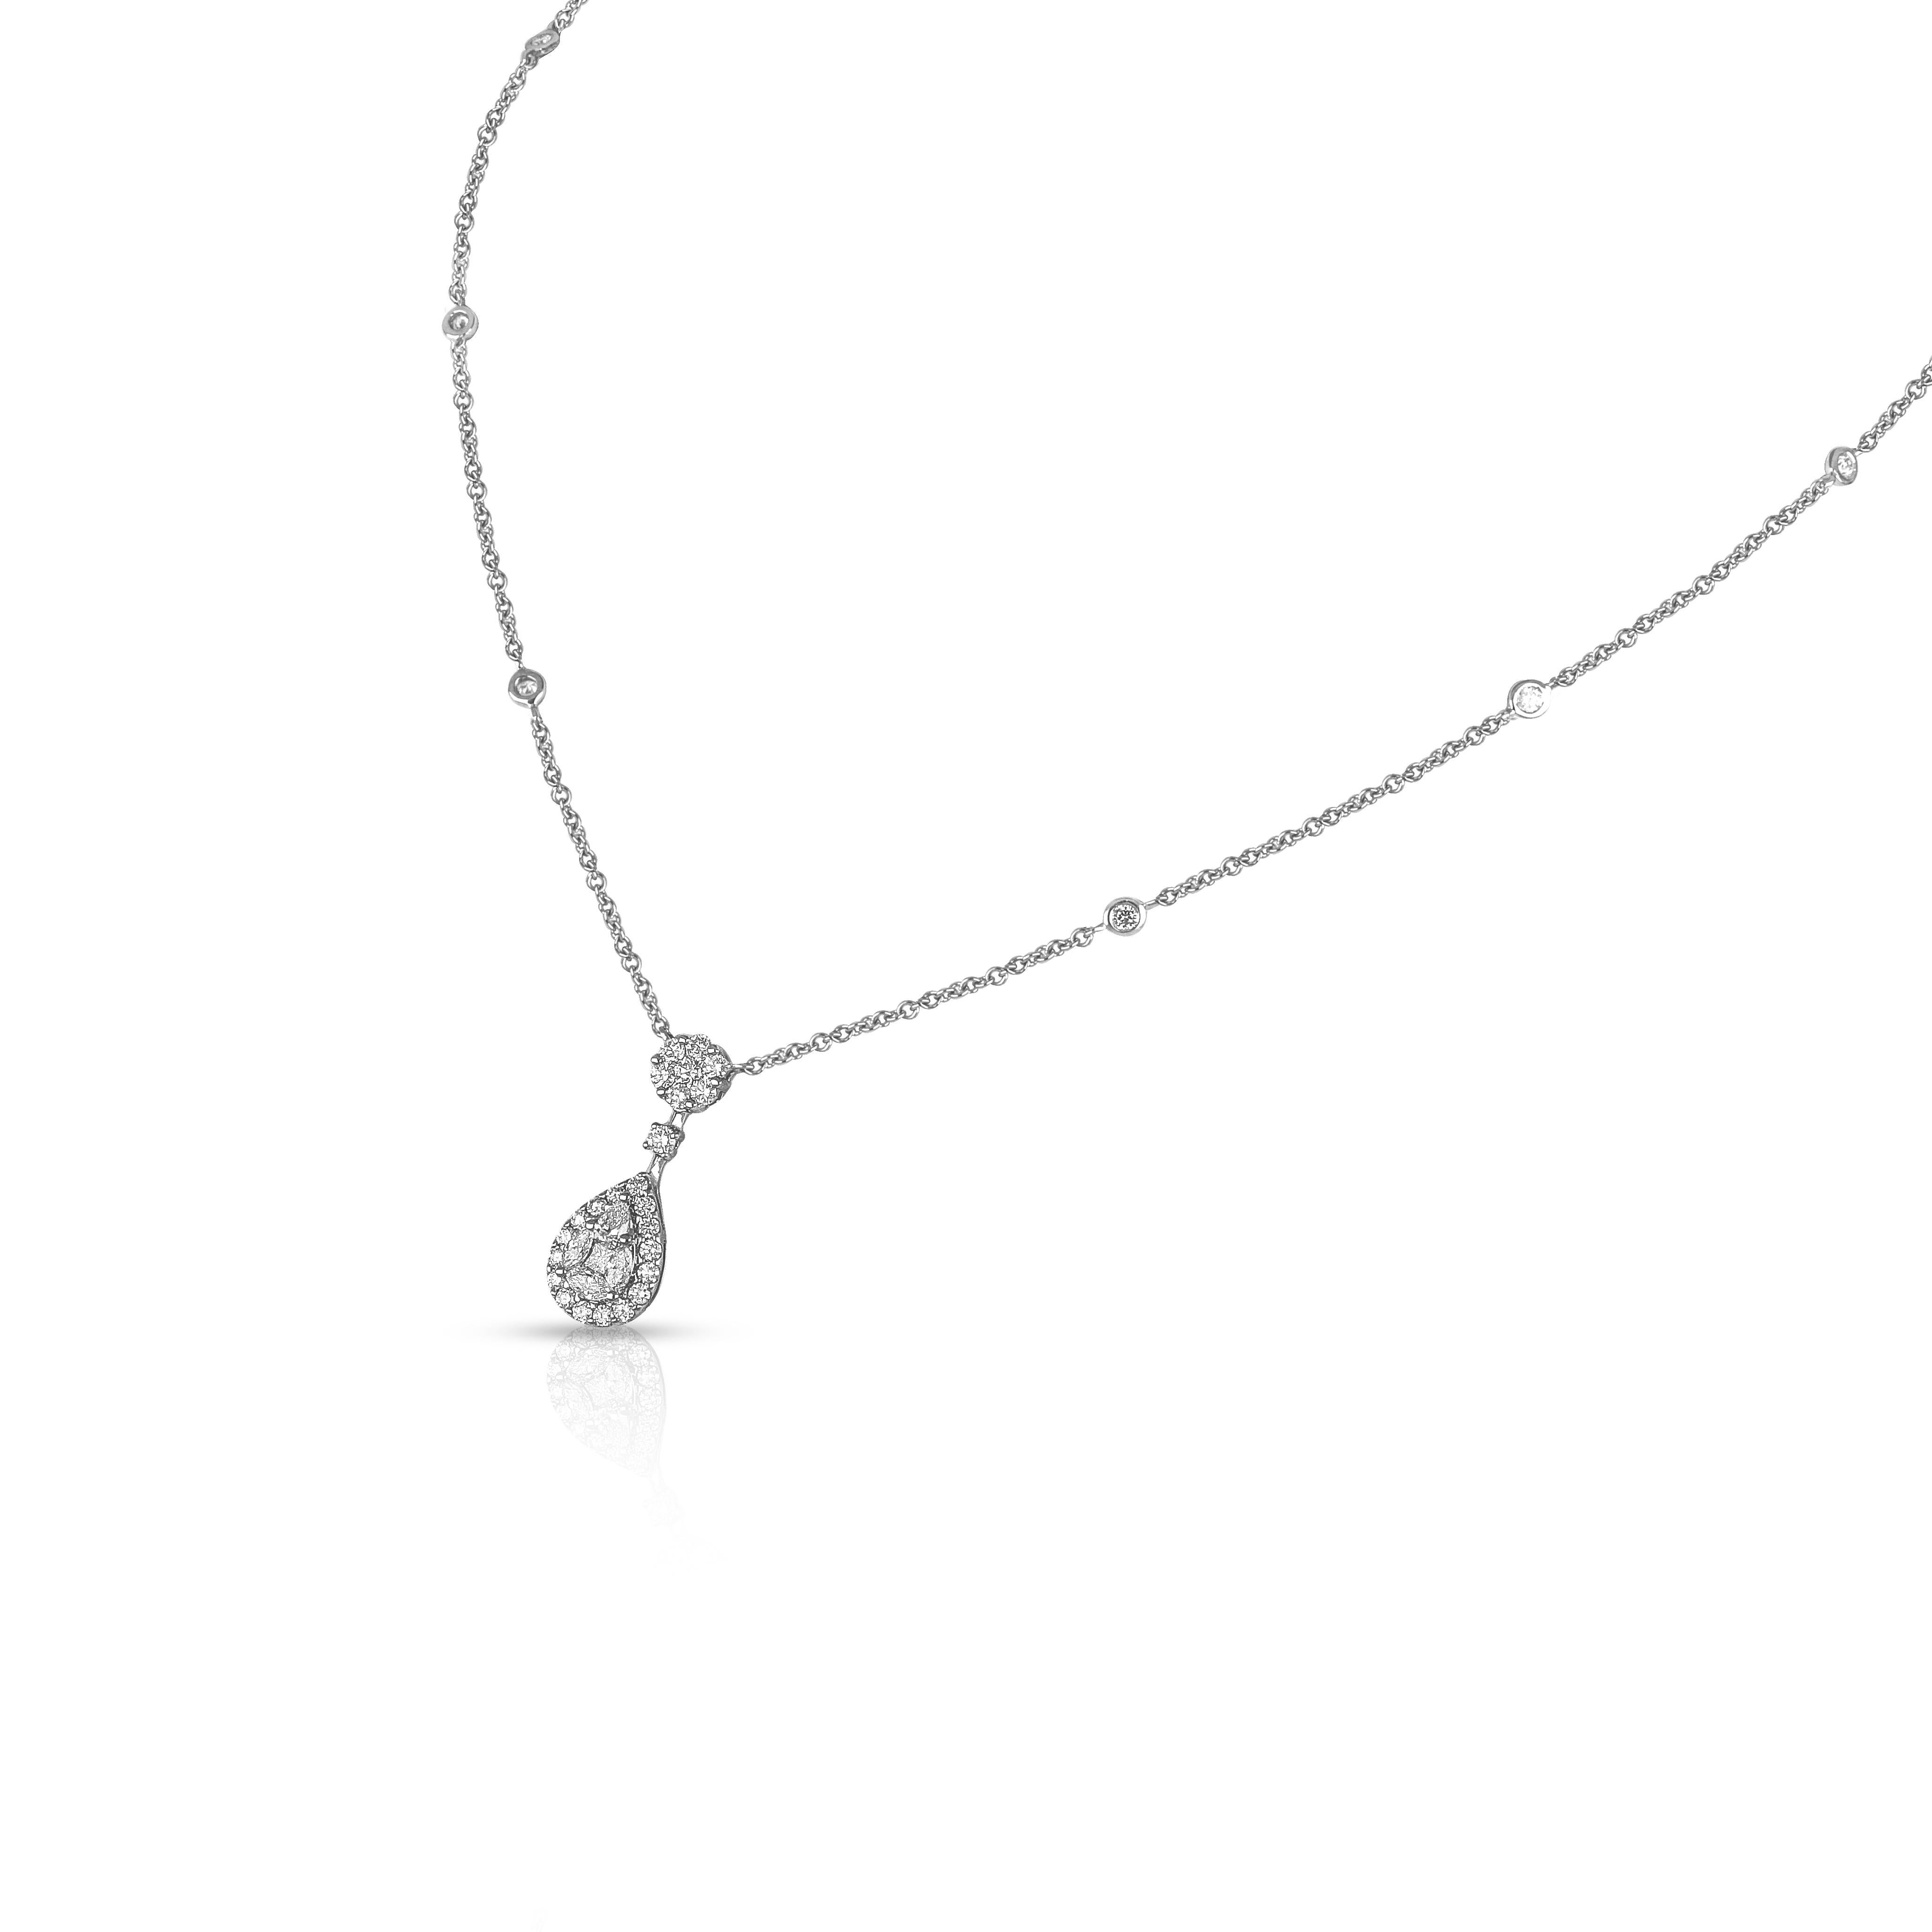 A timeless pendant that is set with round and marquise cut diamonds demonstrating the exceptional quality, this multi-cut diamond pendant is an elegant design that is perfect for both daywear and eveningwear, suspended from a fine 18 karat white